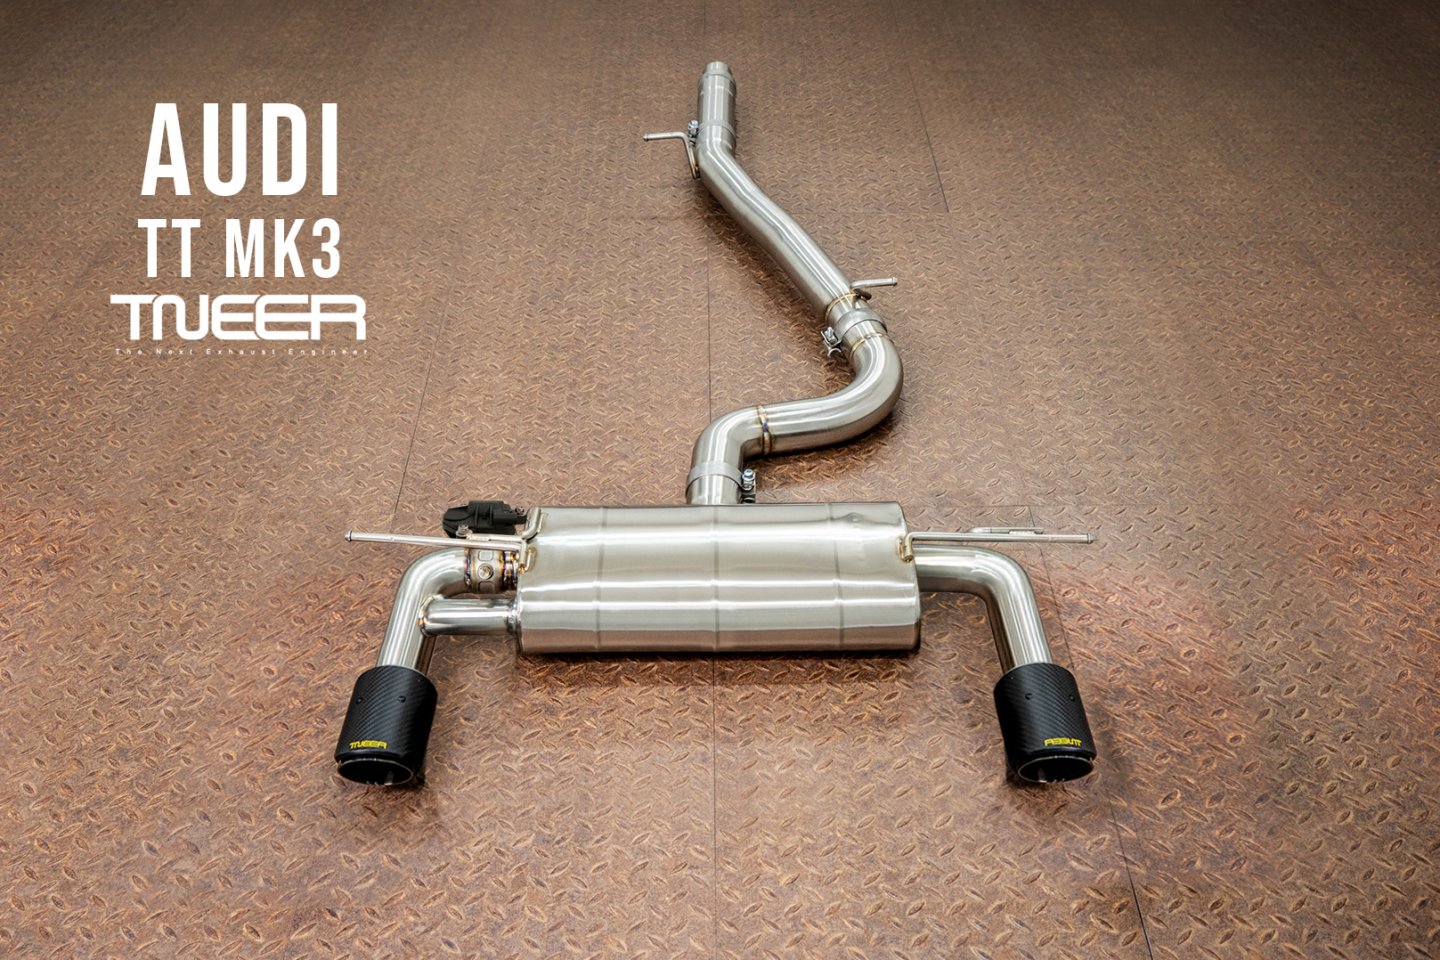 Audi TT (MK3) TNEER Exhaust System with TACS